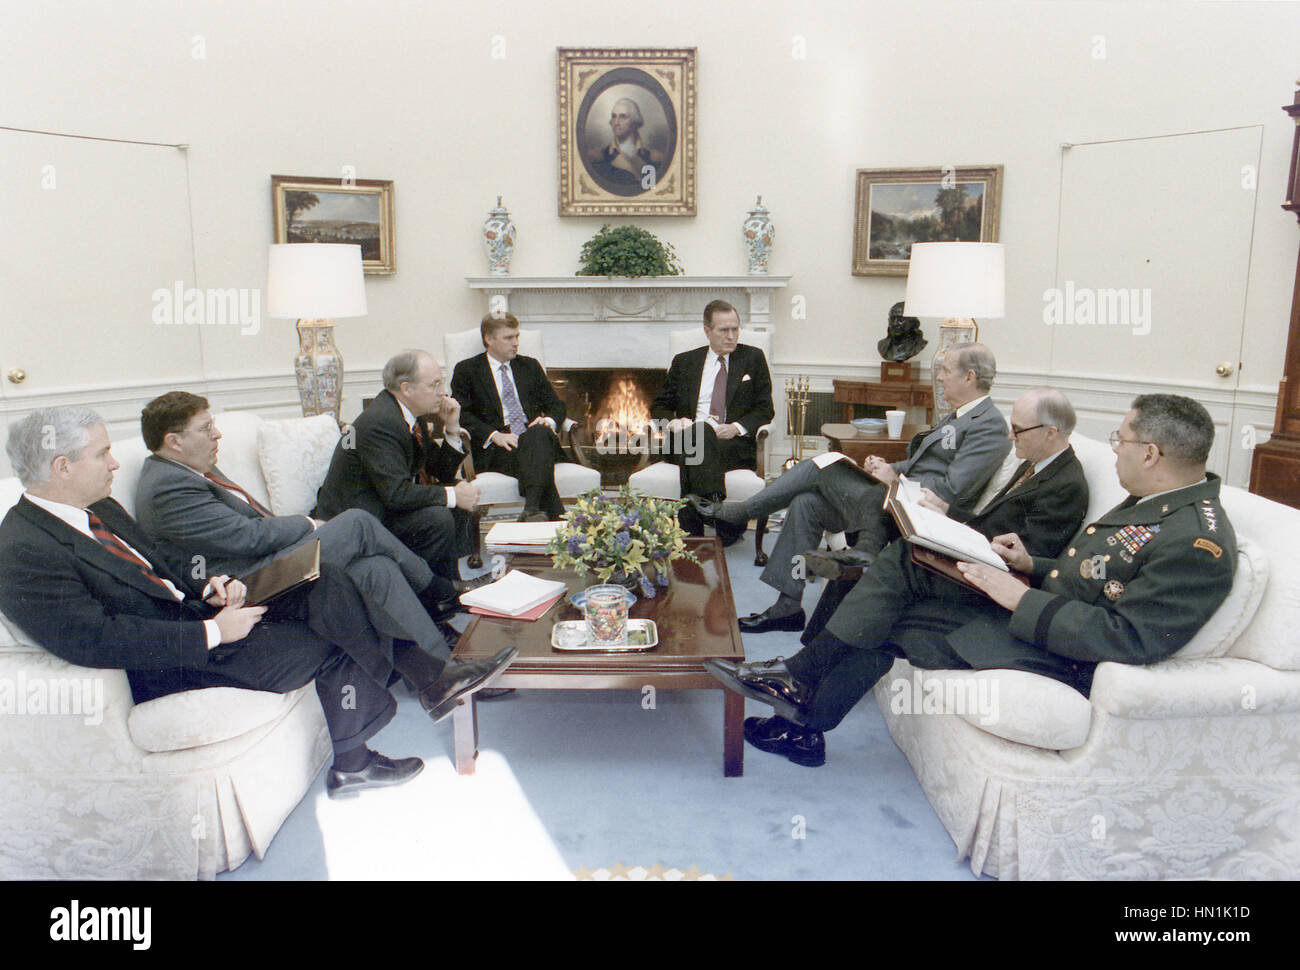 GEORGE H.W. BUSH  As 41st President of the United States with advisers including General Colin Powell at right discussing Operation Desert Shield on 15 January 1991 Stock Photo